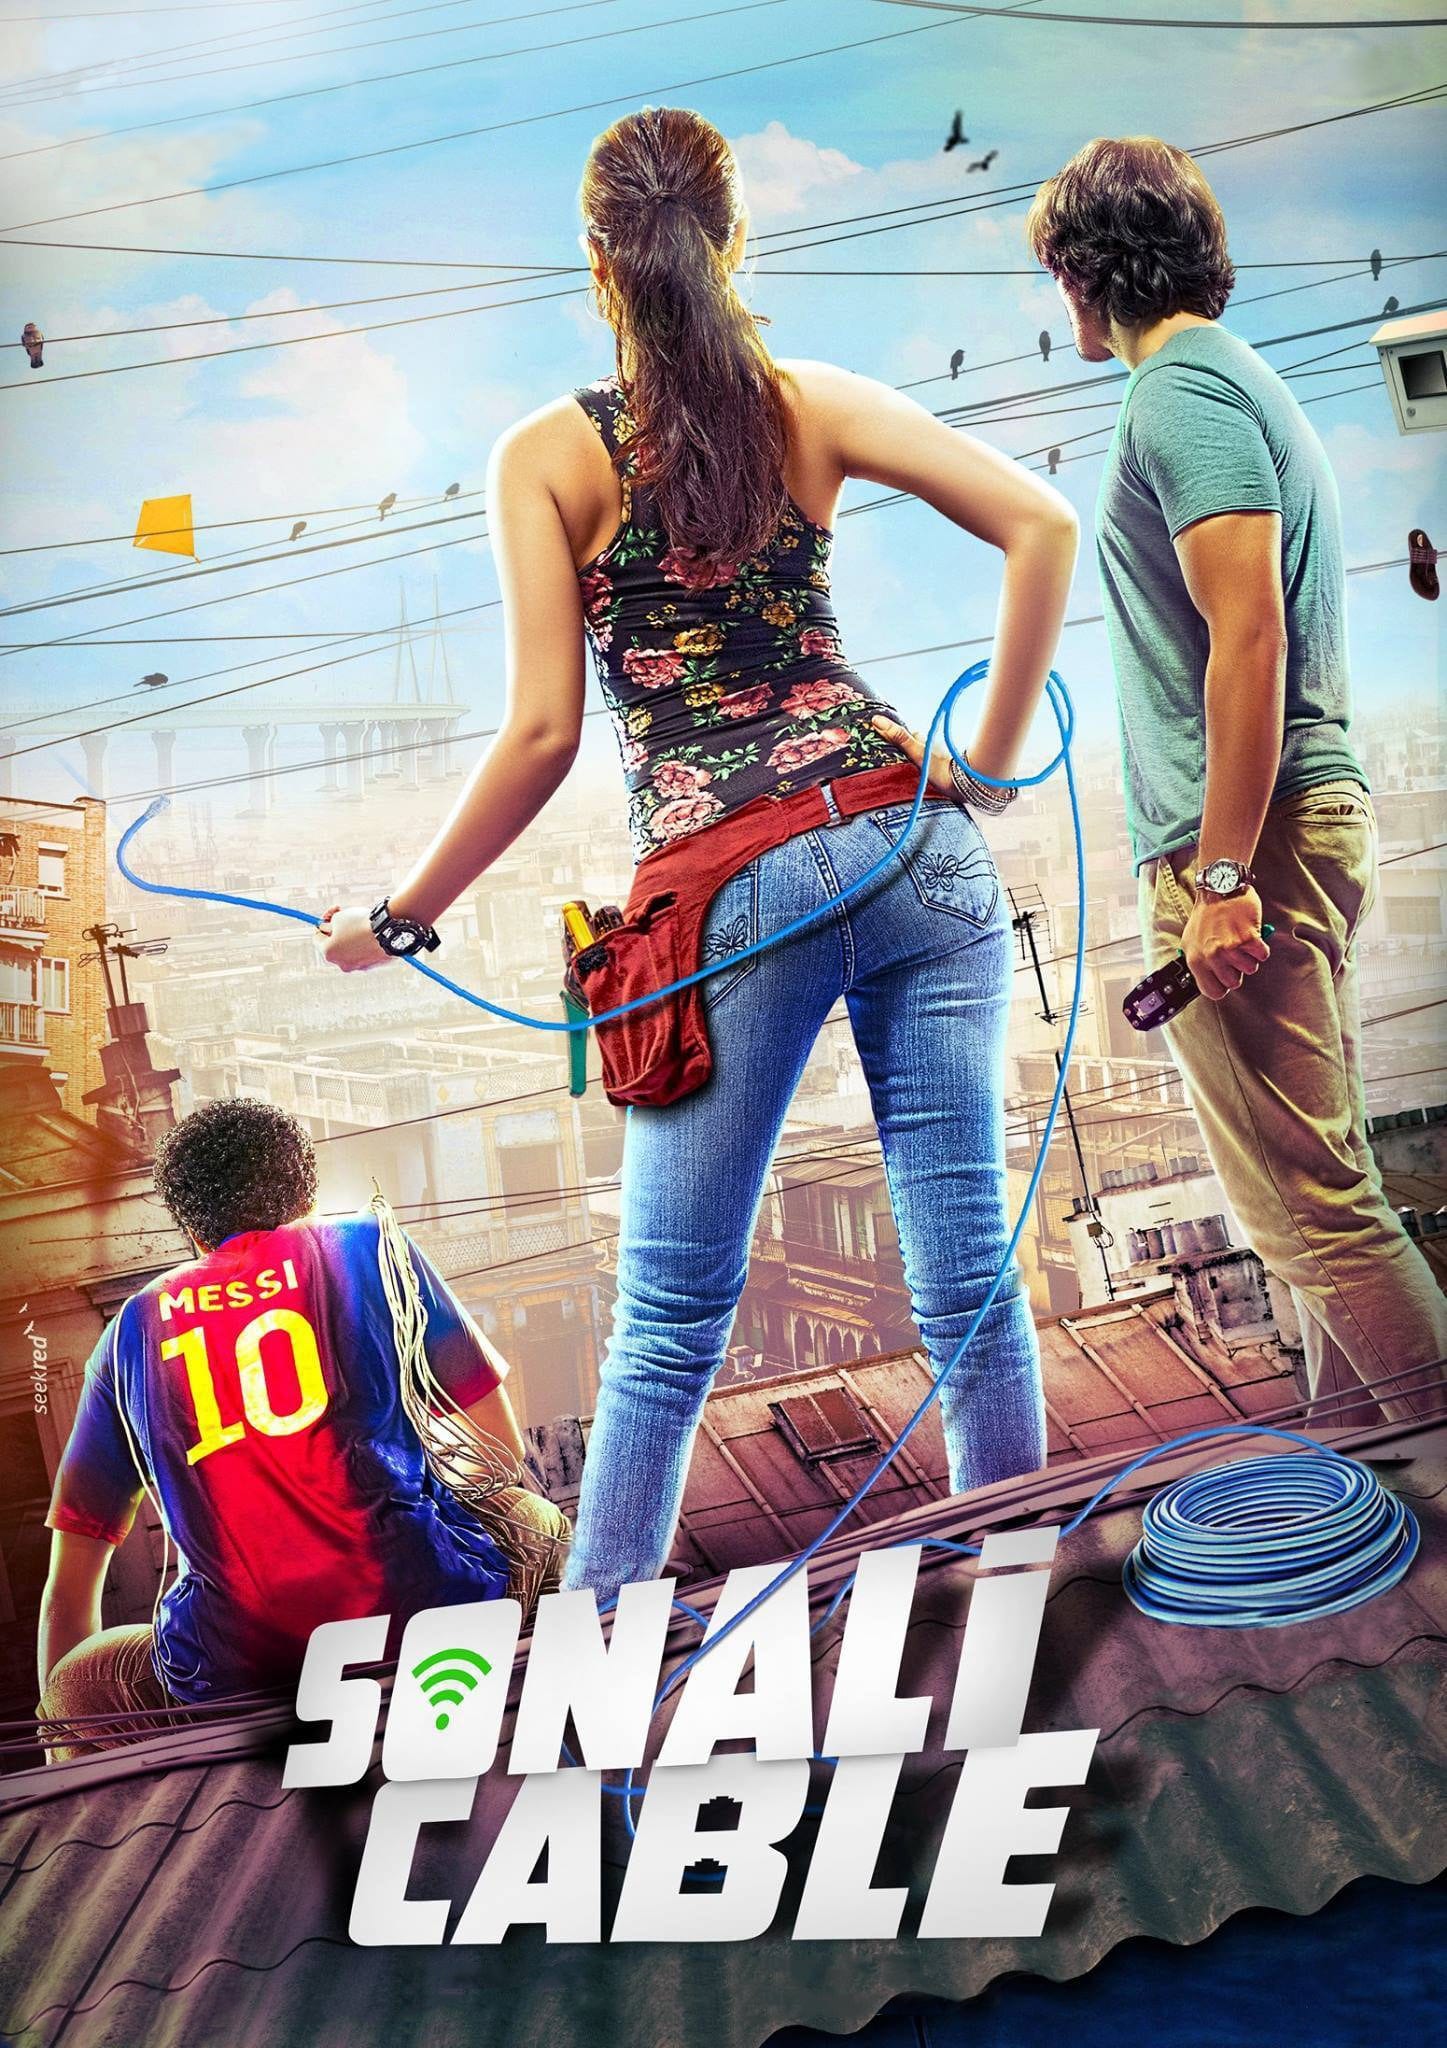 Poster for the movie "Sonali Cable"